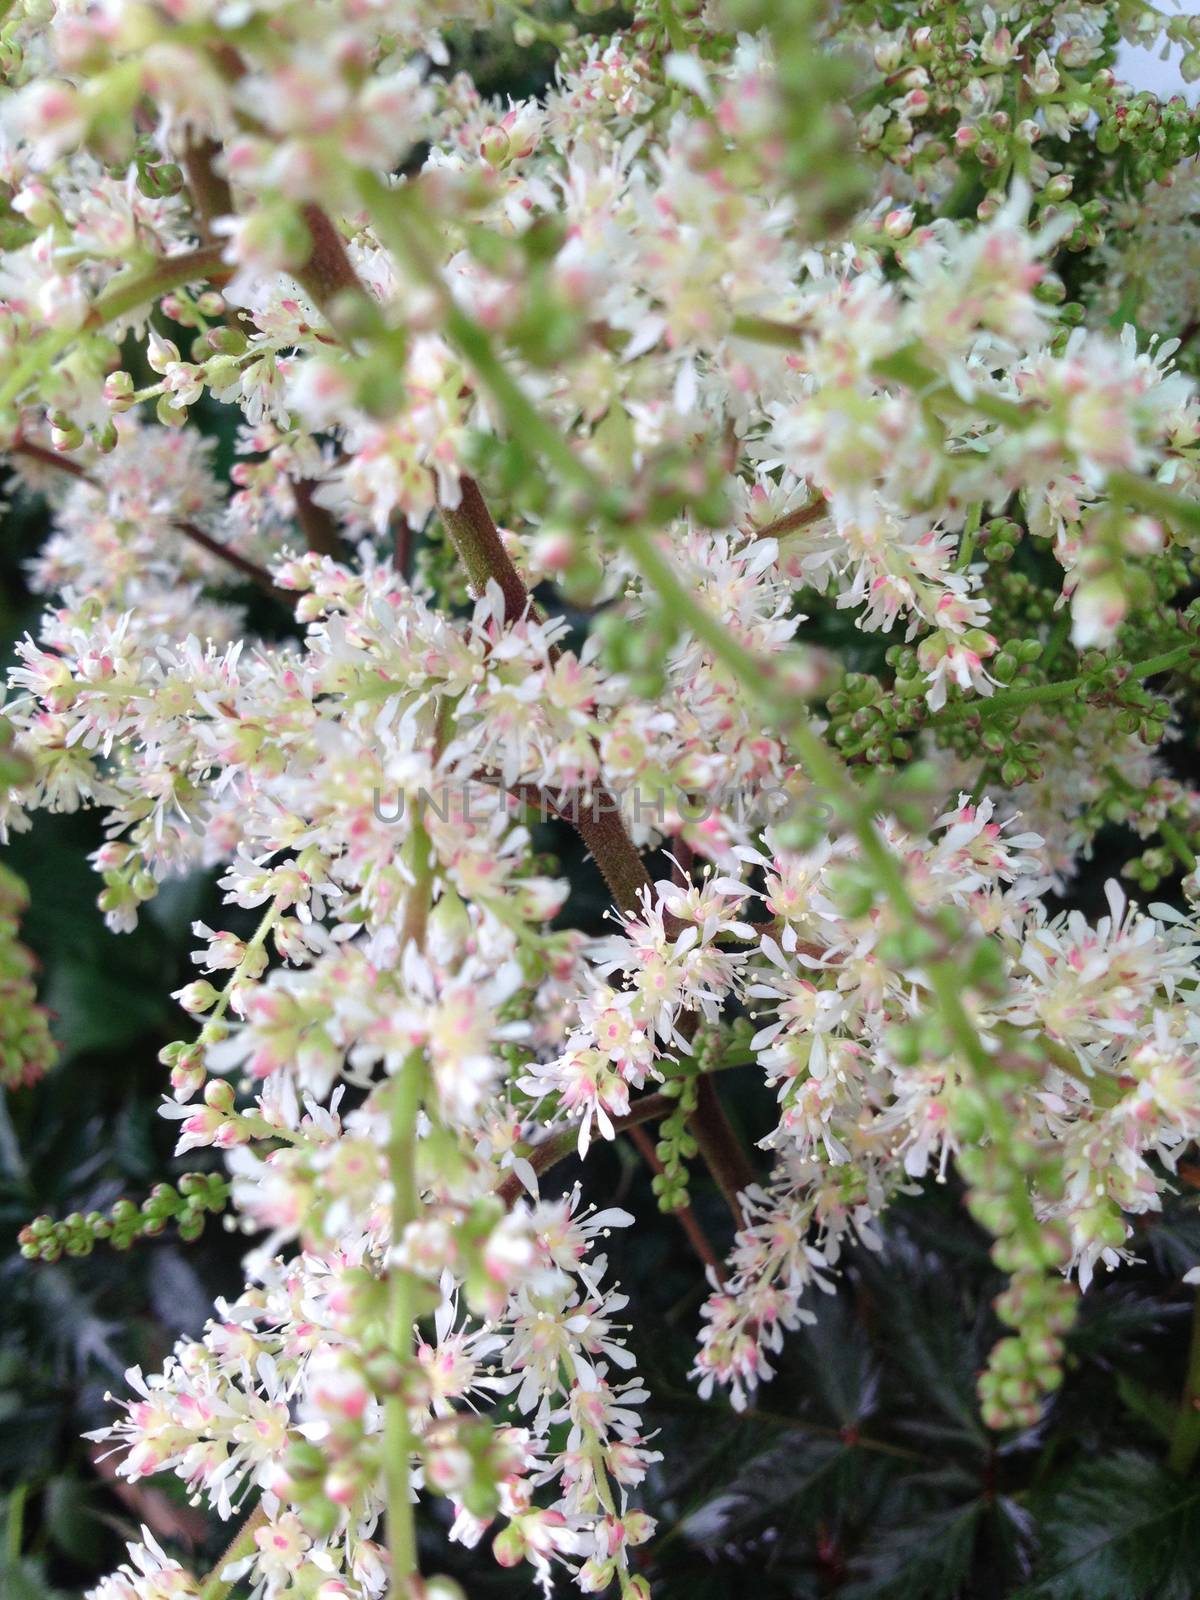 Fine white holodiscus flowers on a plant in nature